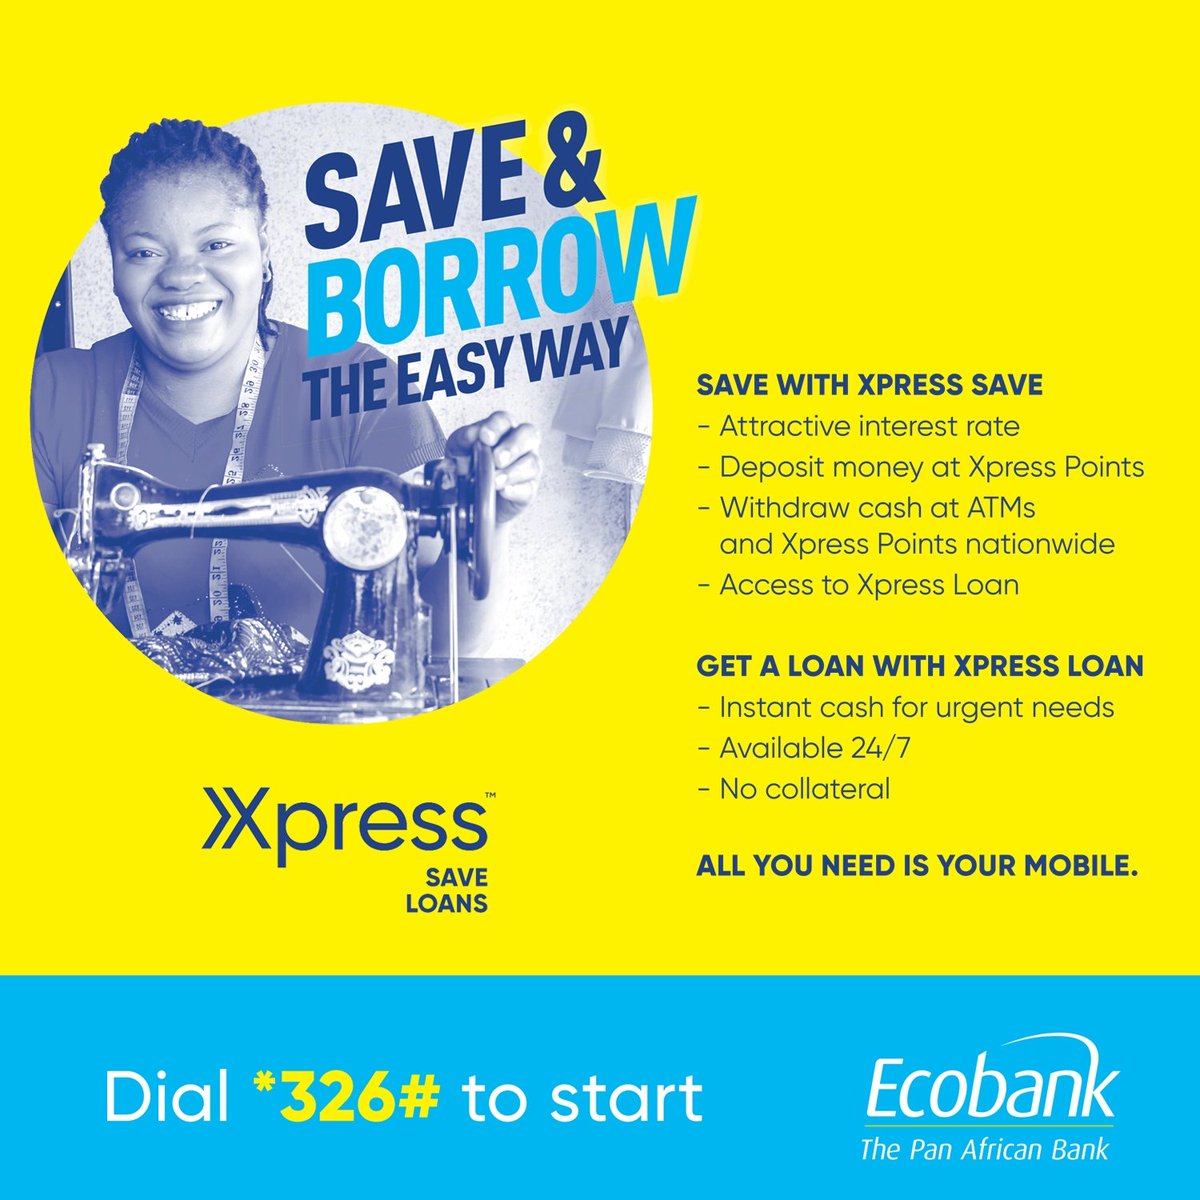 Ecobank Nigeria On Twitter Getting Loans Just Got Easier With